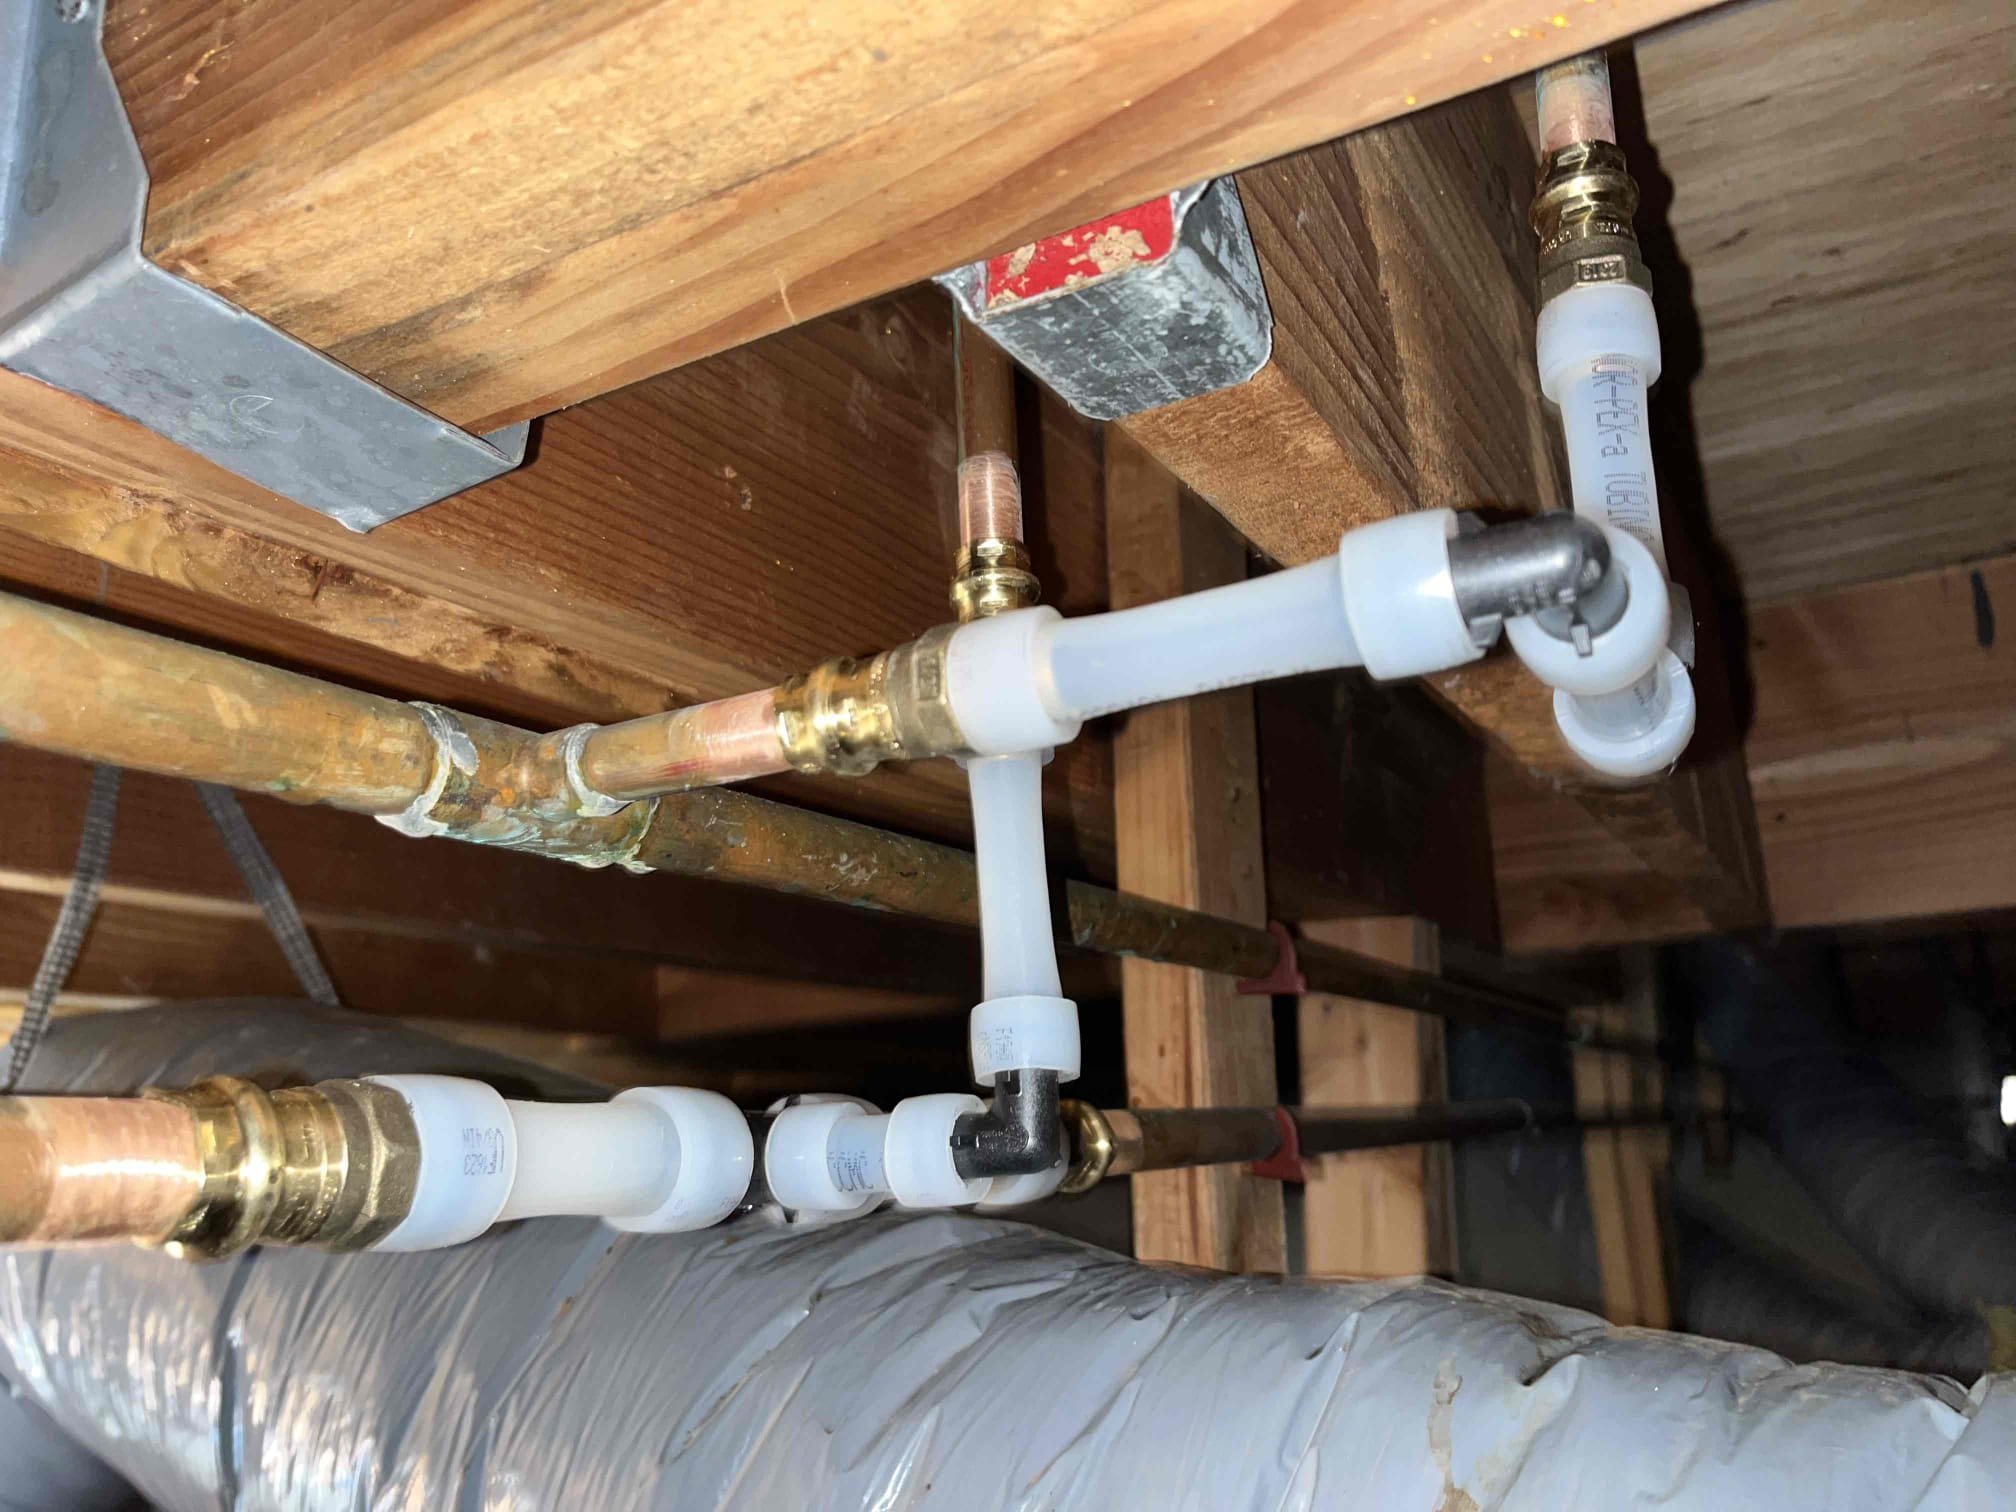 Water line replacement in Tigard, OR with Cornel's Plumbing.